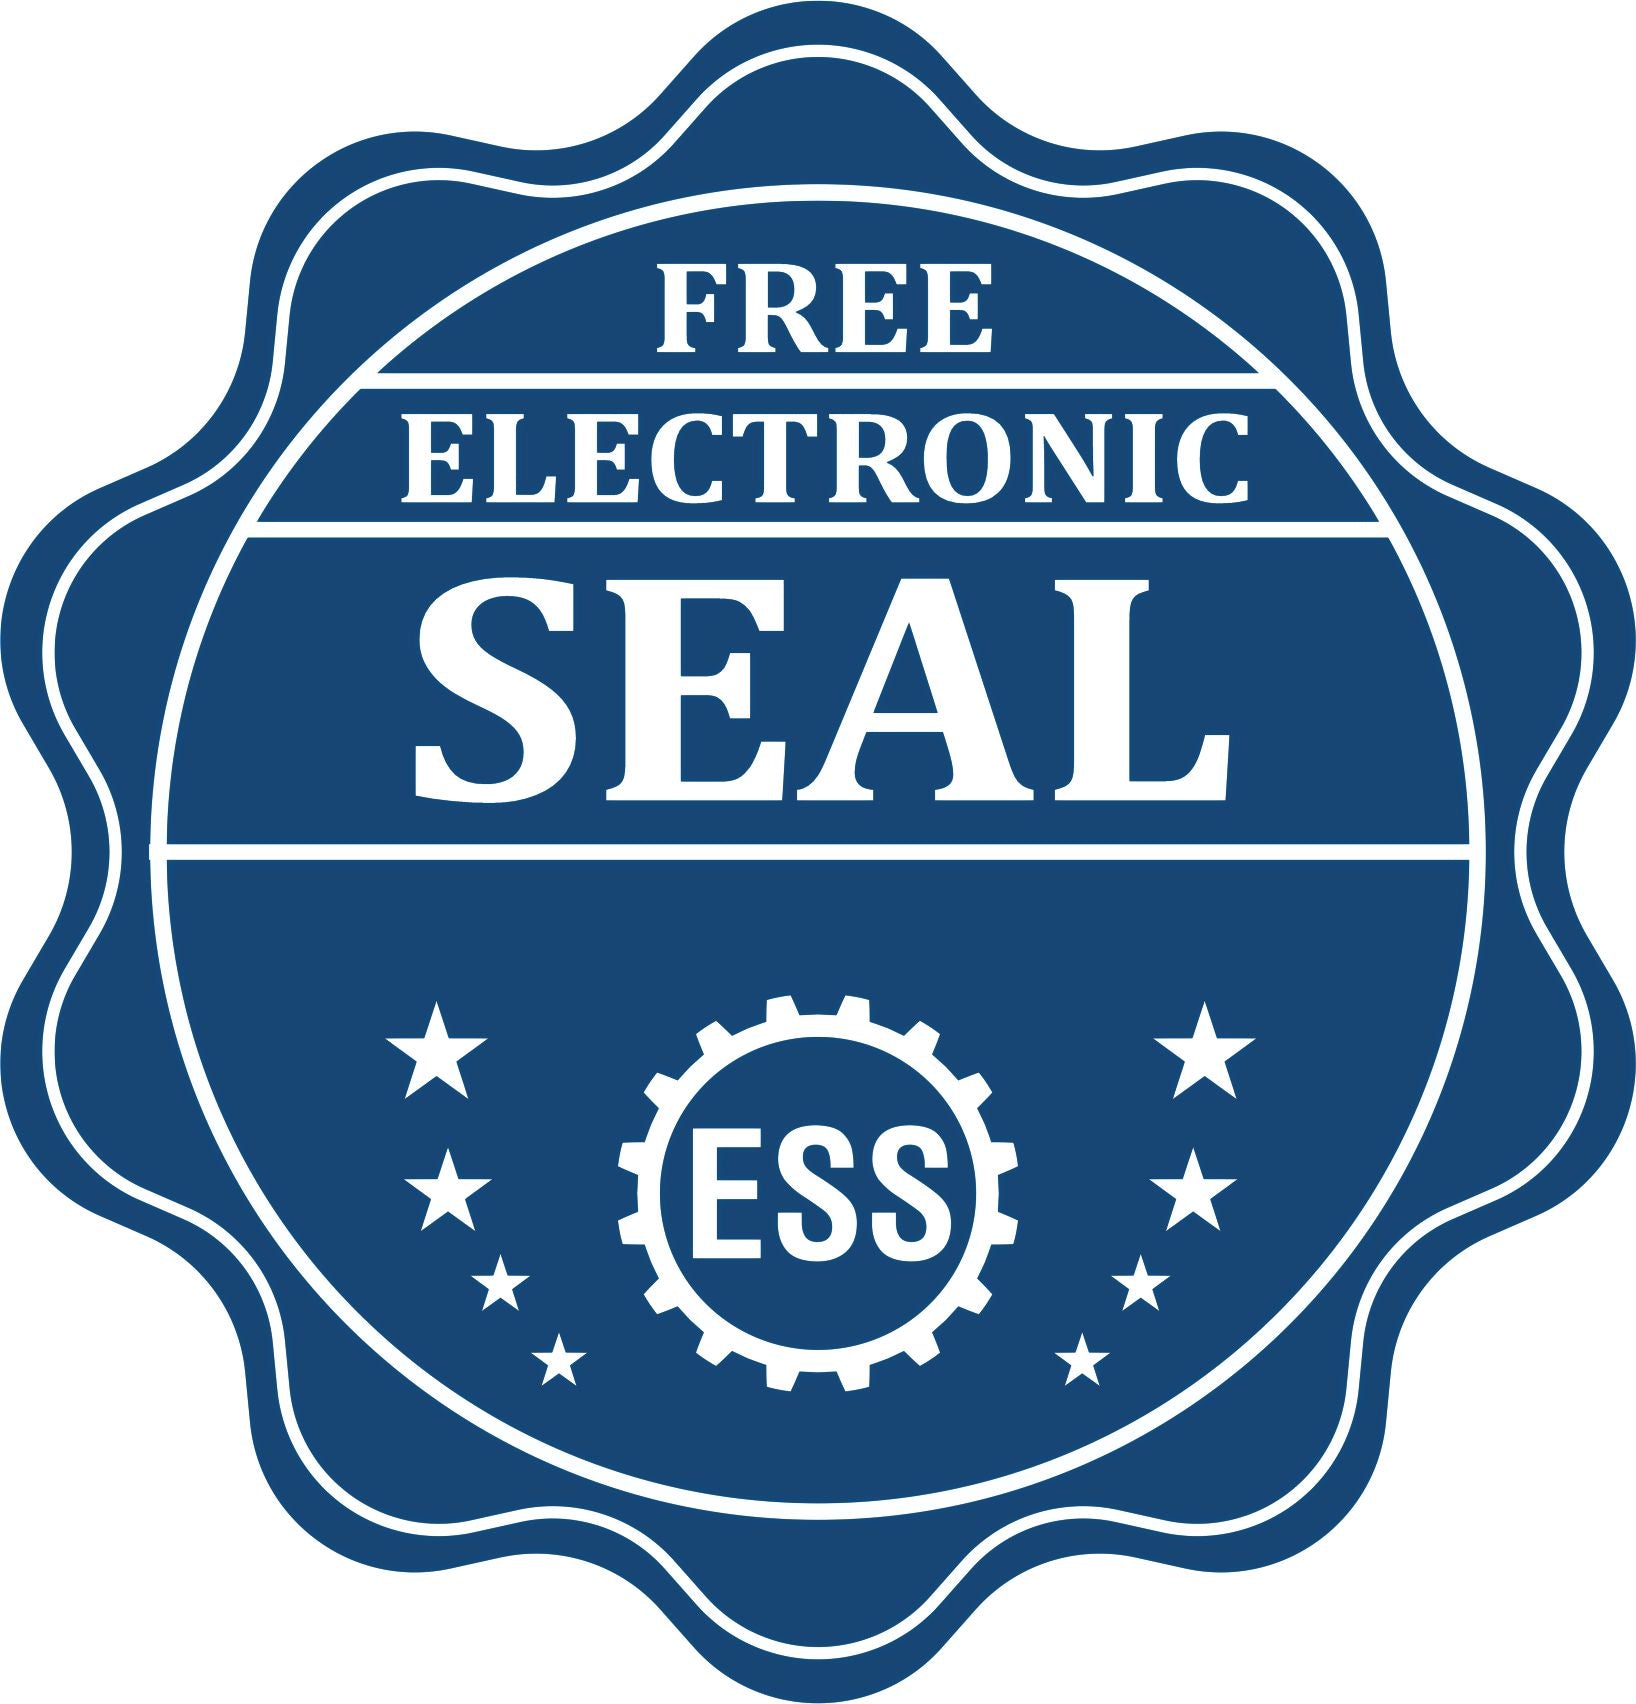 A badge showing a free electronic seal for the Super Slim West Virginia Notary Public Stamp with stars and the ESS gear on the emblem.